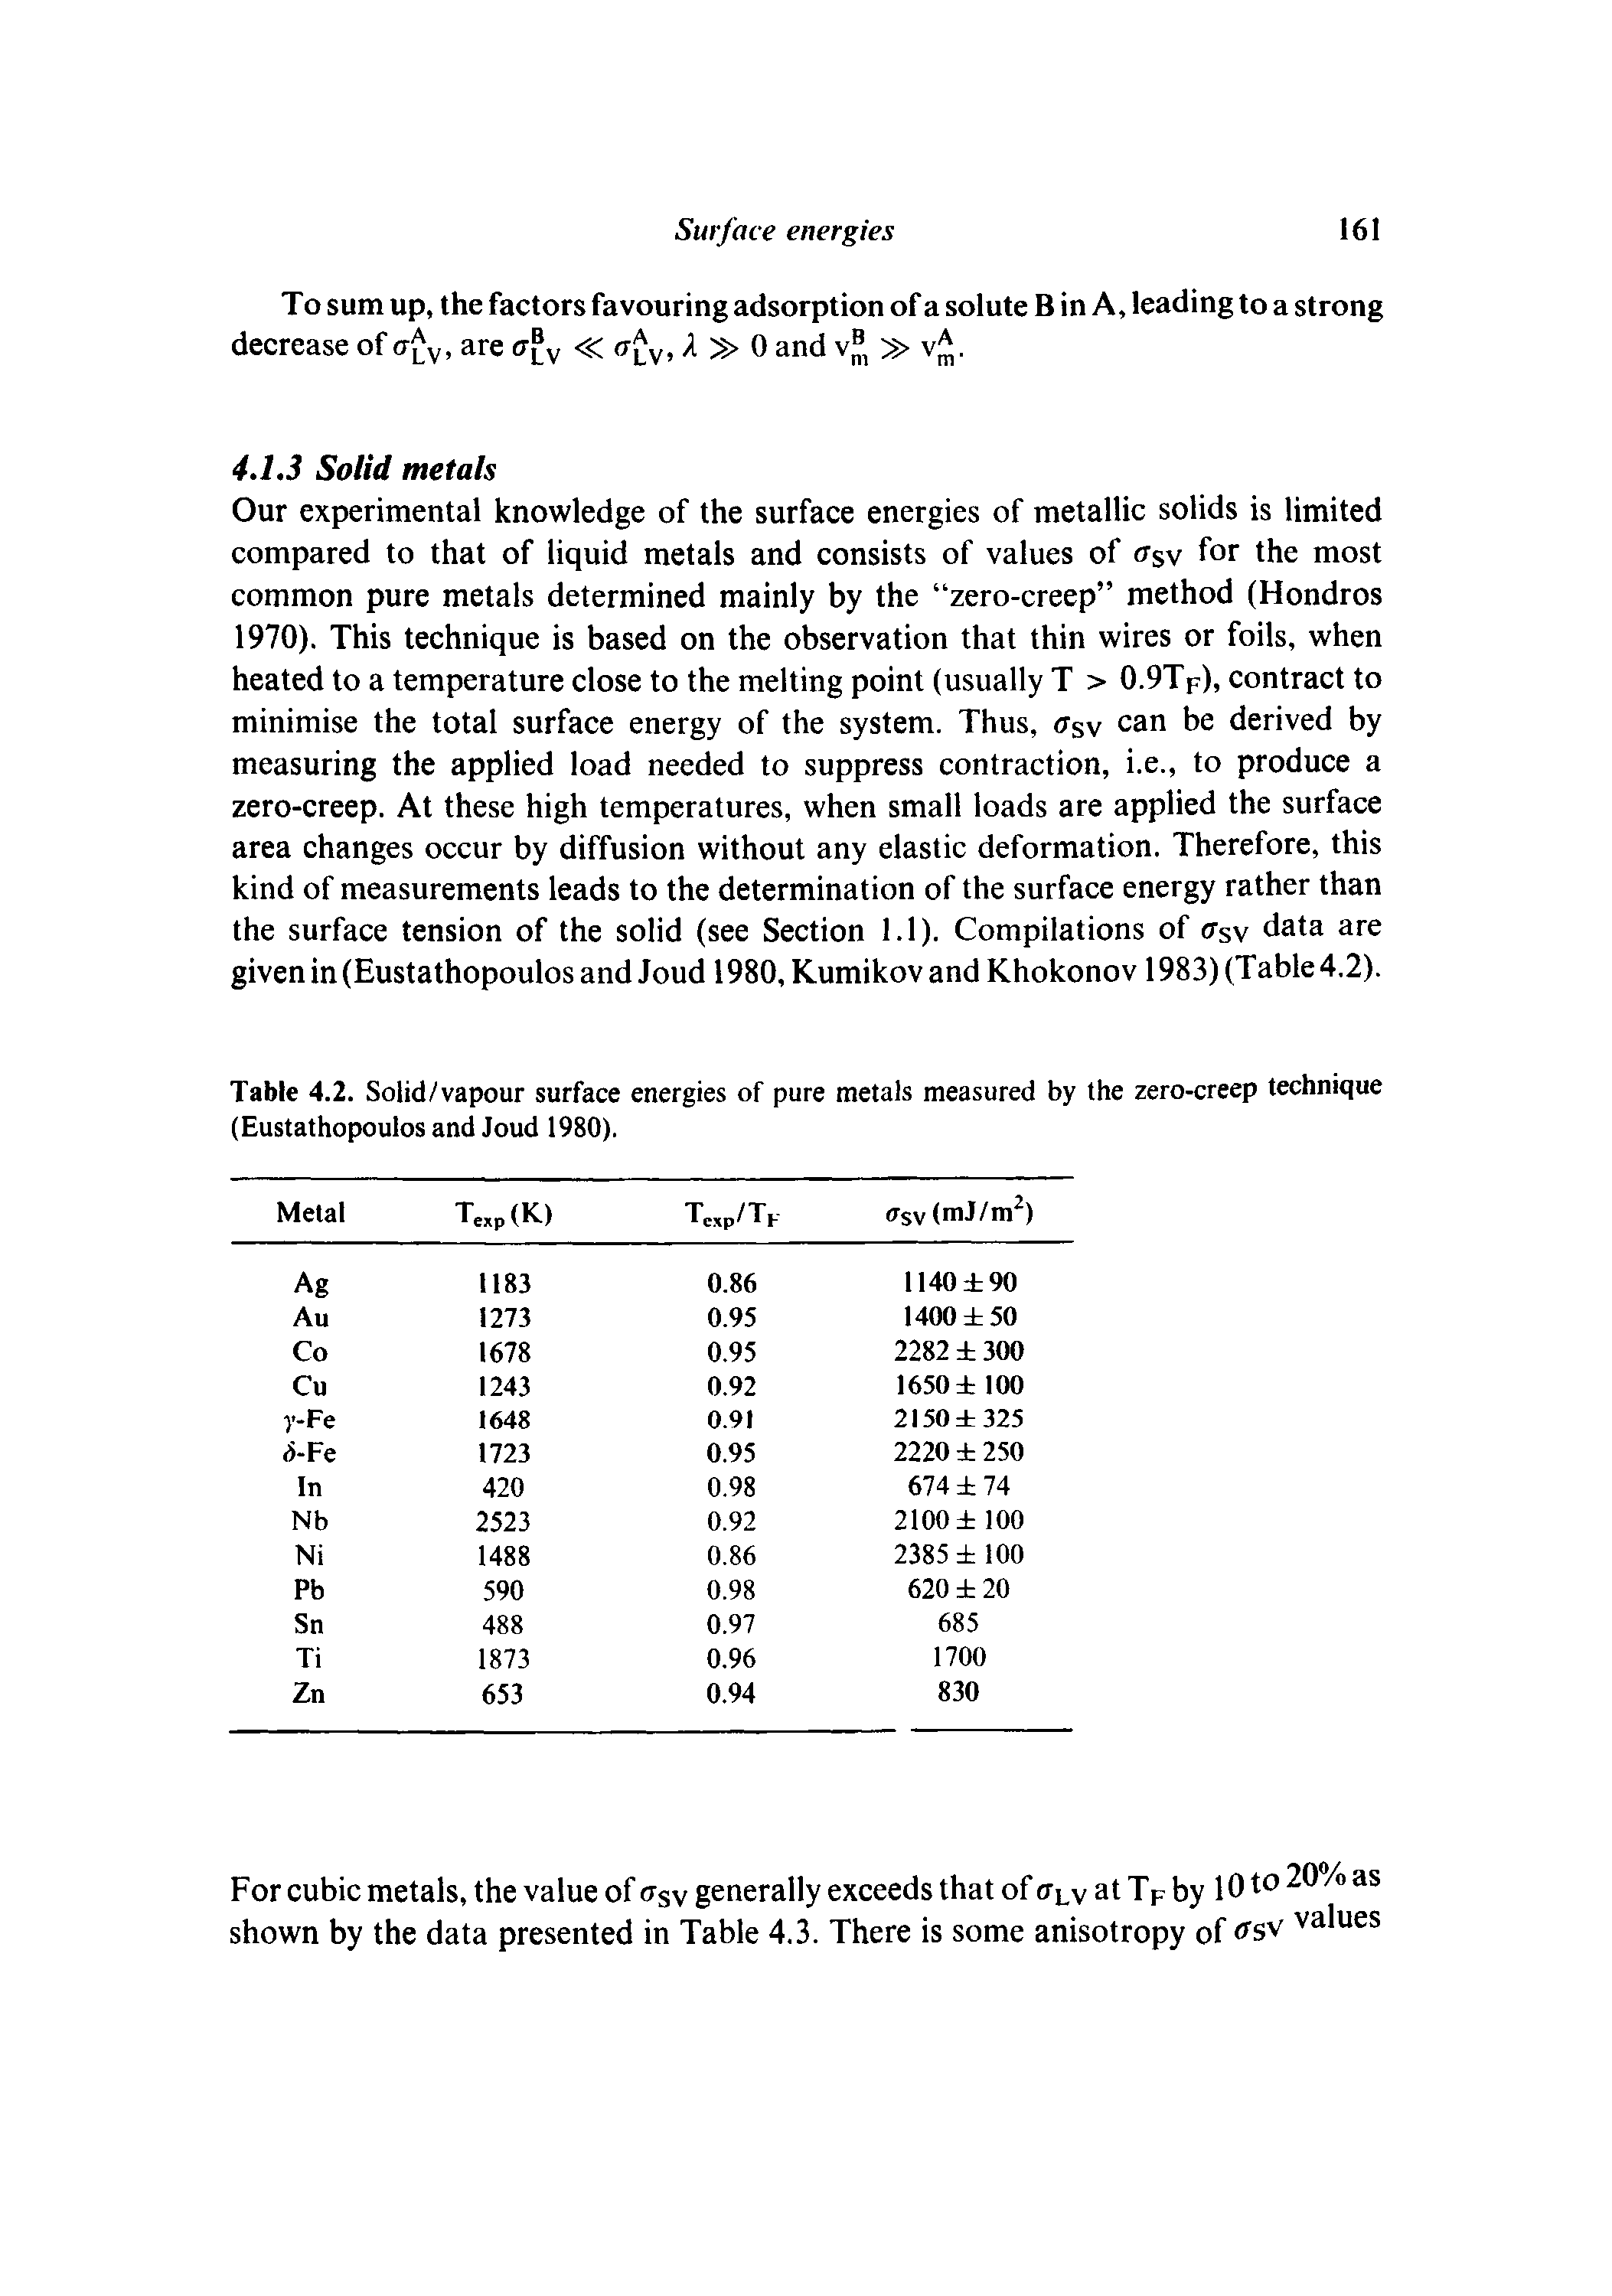 Table 4.2. Solid/vapour surface energies of pure metals measured by the zero-creep technique (Eustathopoulos and Joud 1980).